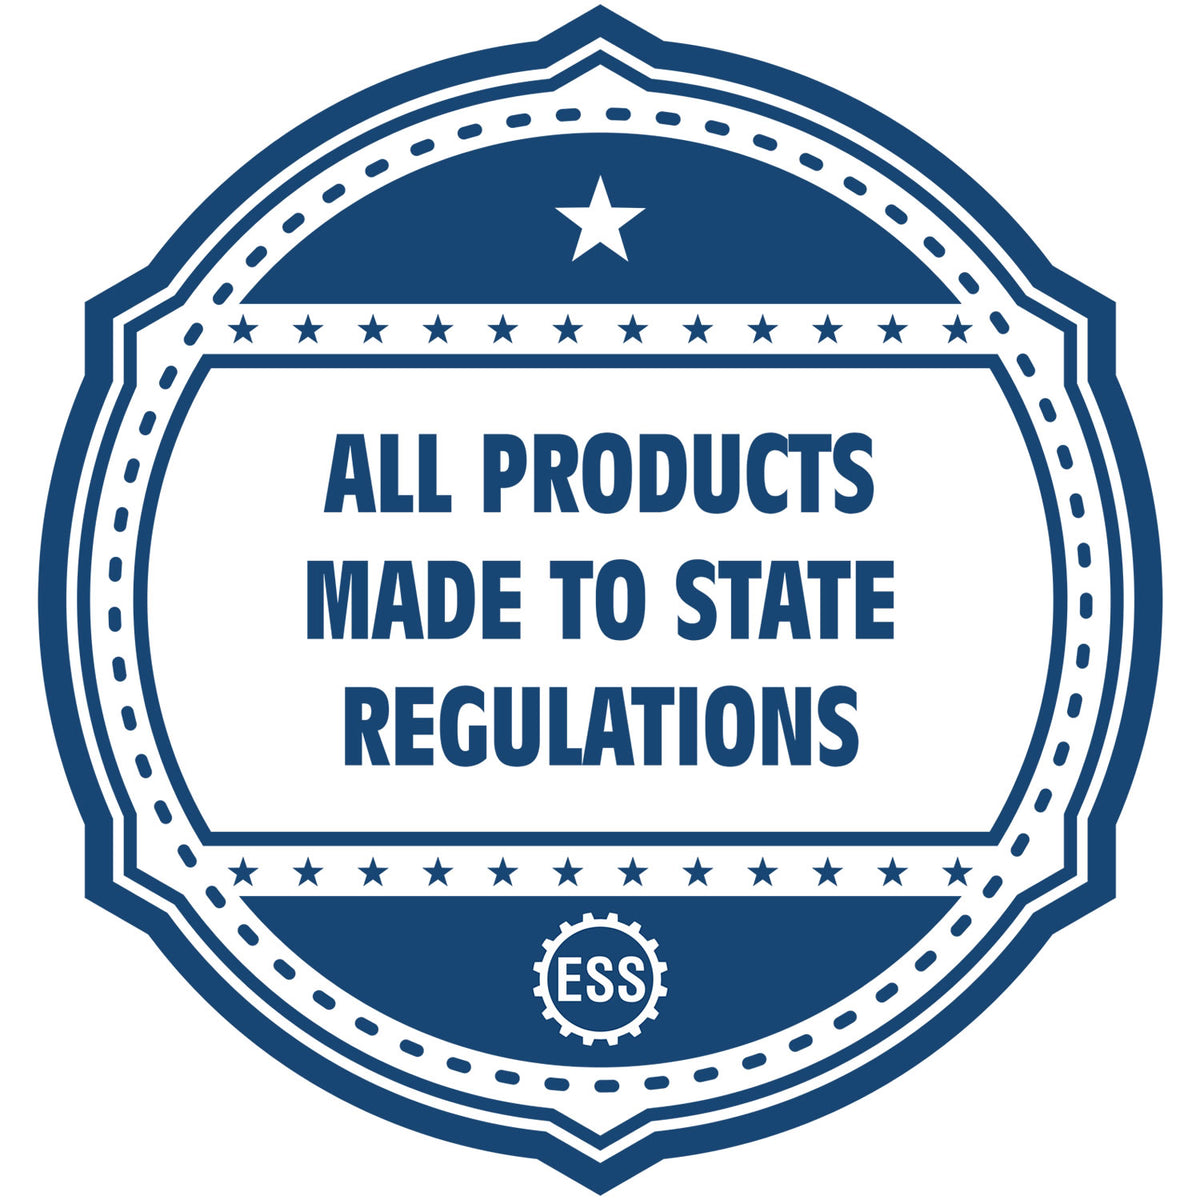 An icon or badge element for the Handheld Utah Architect Seal Embosser showing that this product is made in compliance with state regulations.